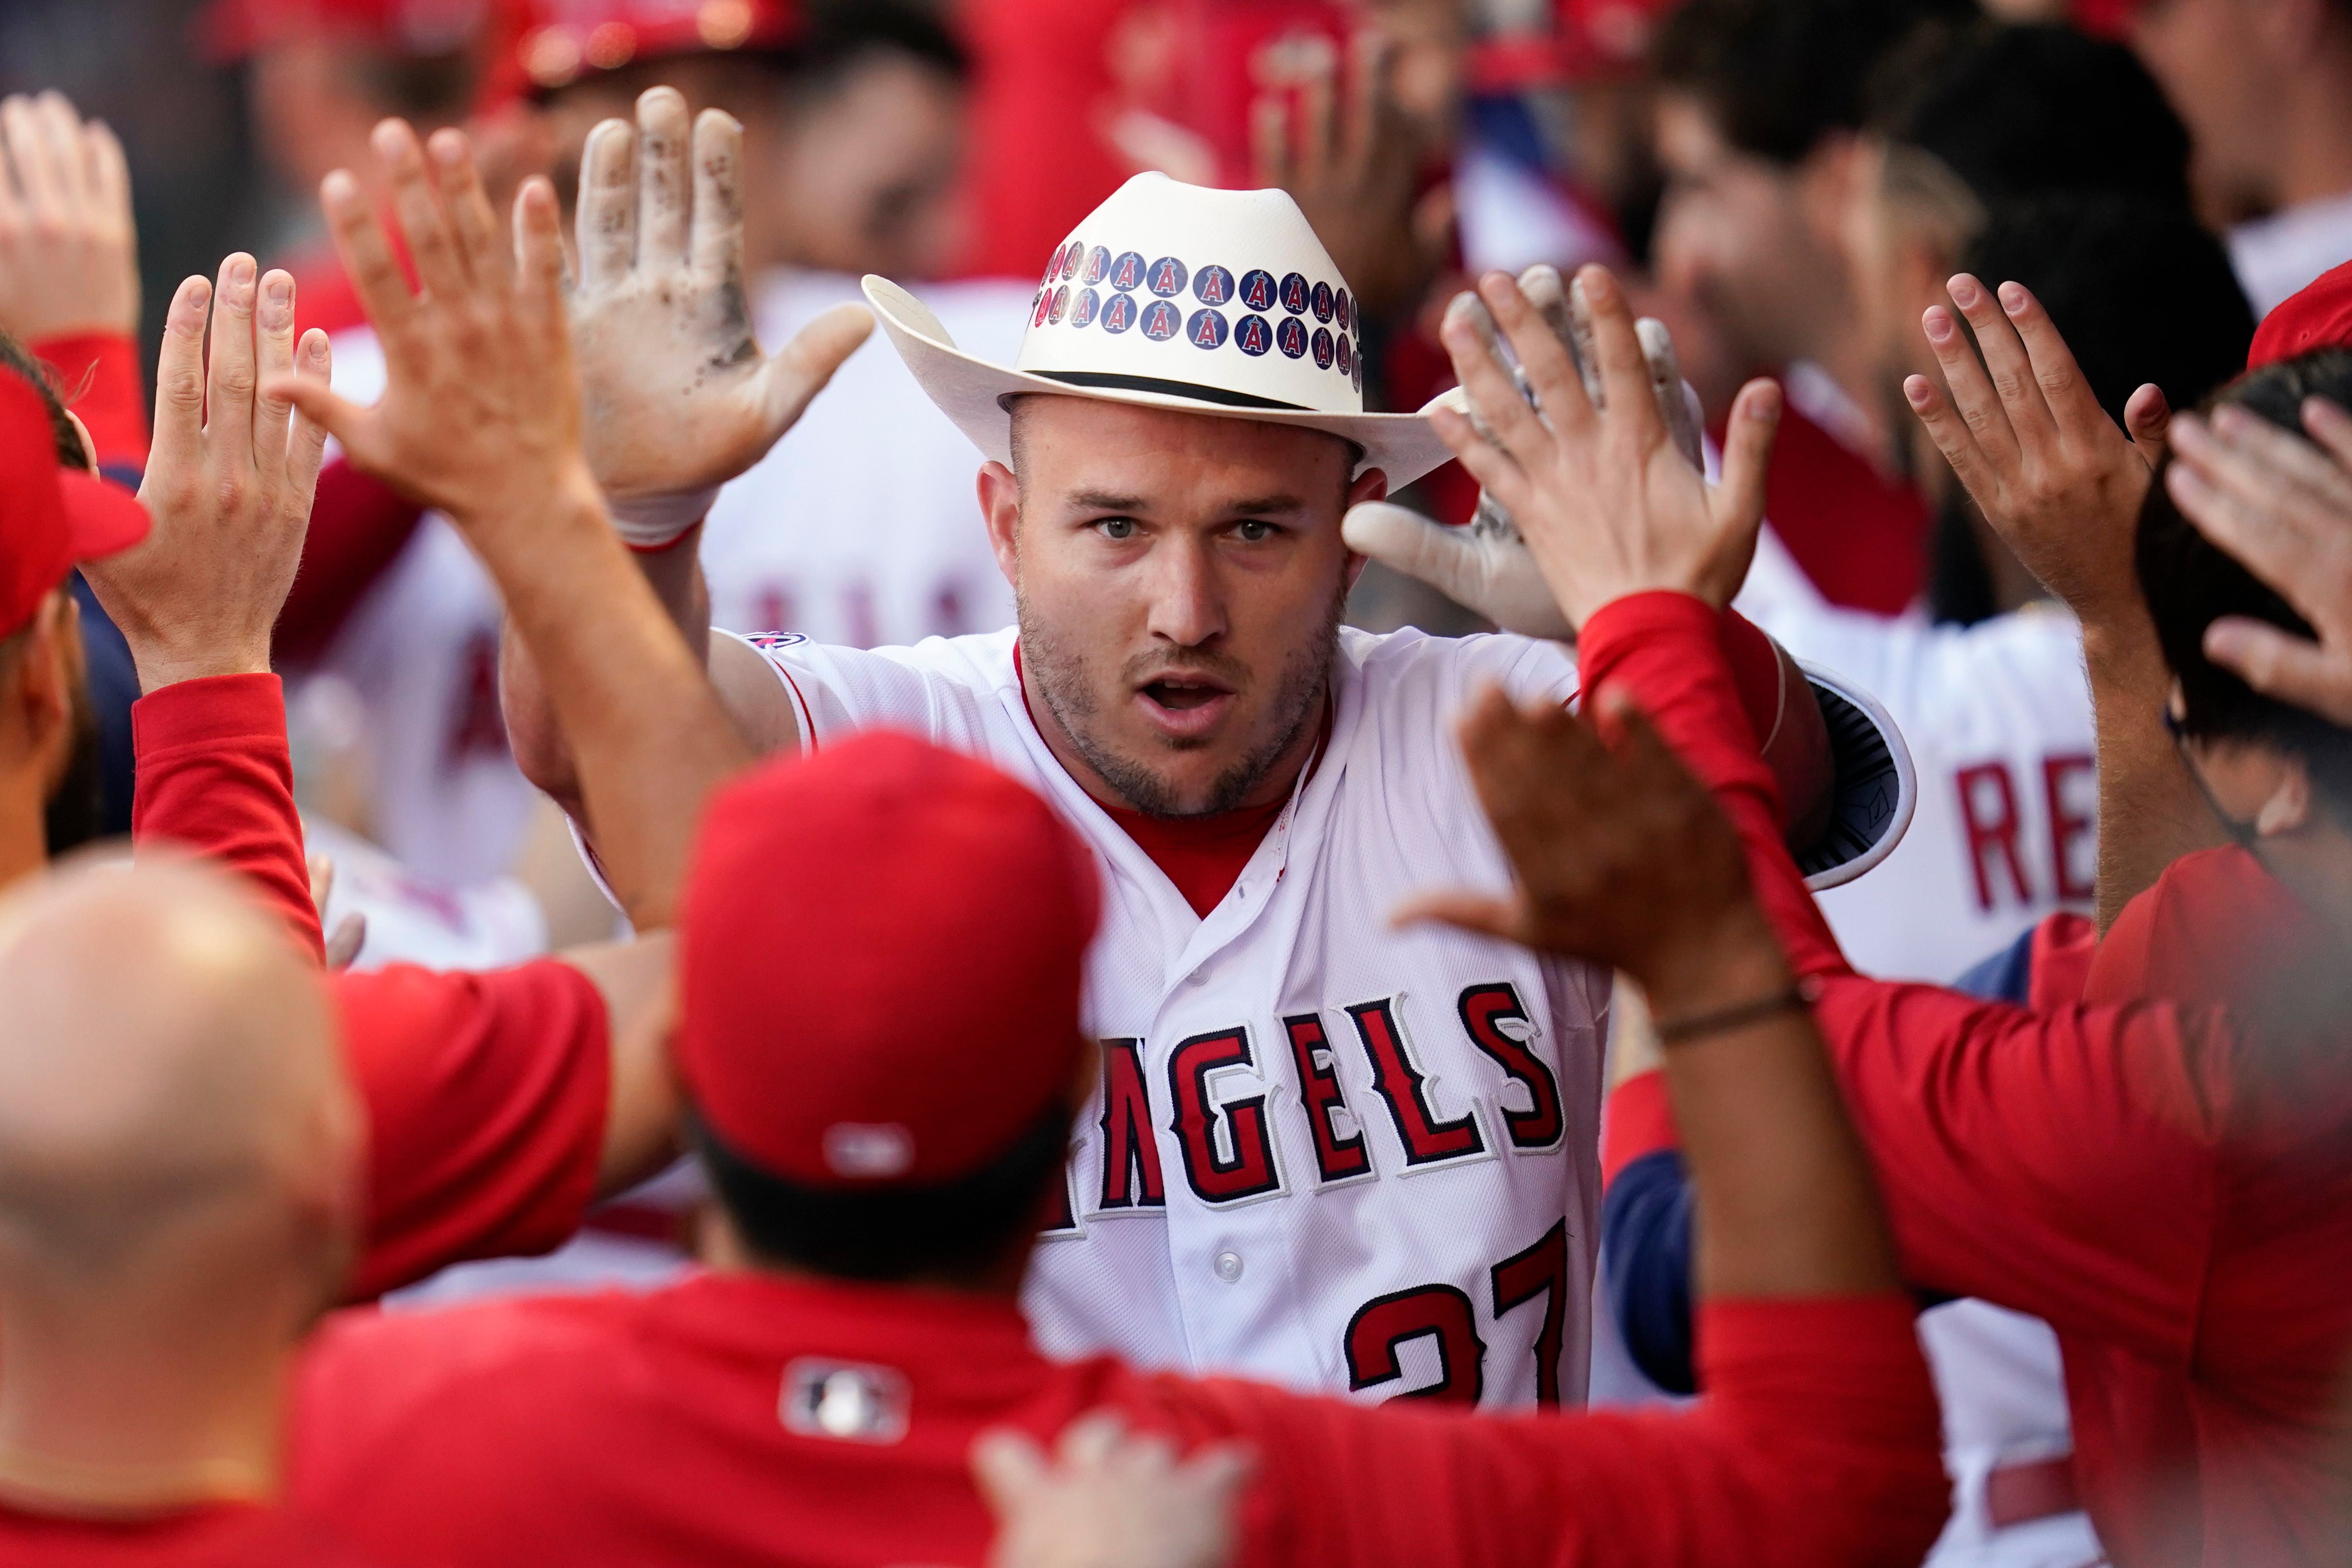 Andrew Velazquez has been hit with Angels since leaving Yankees